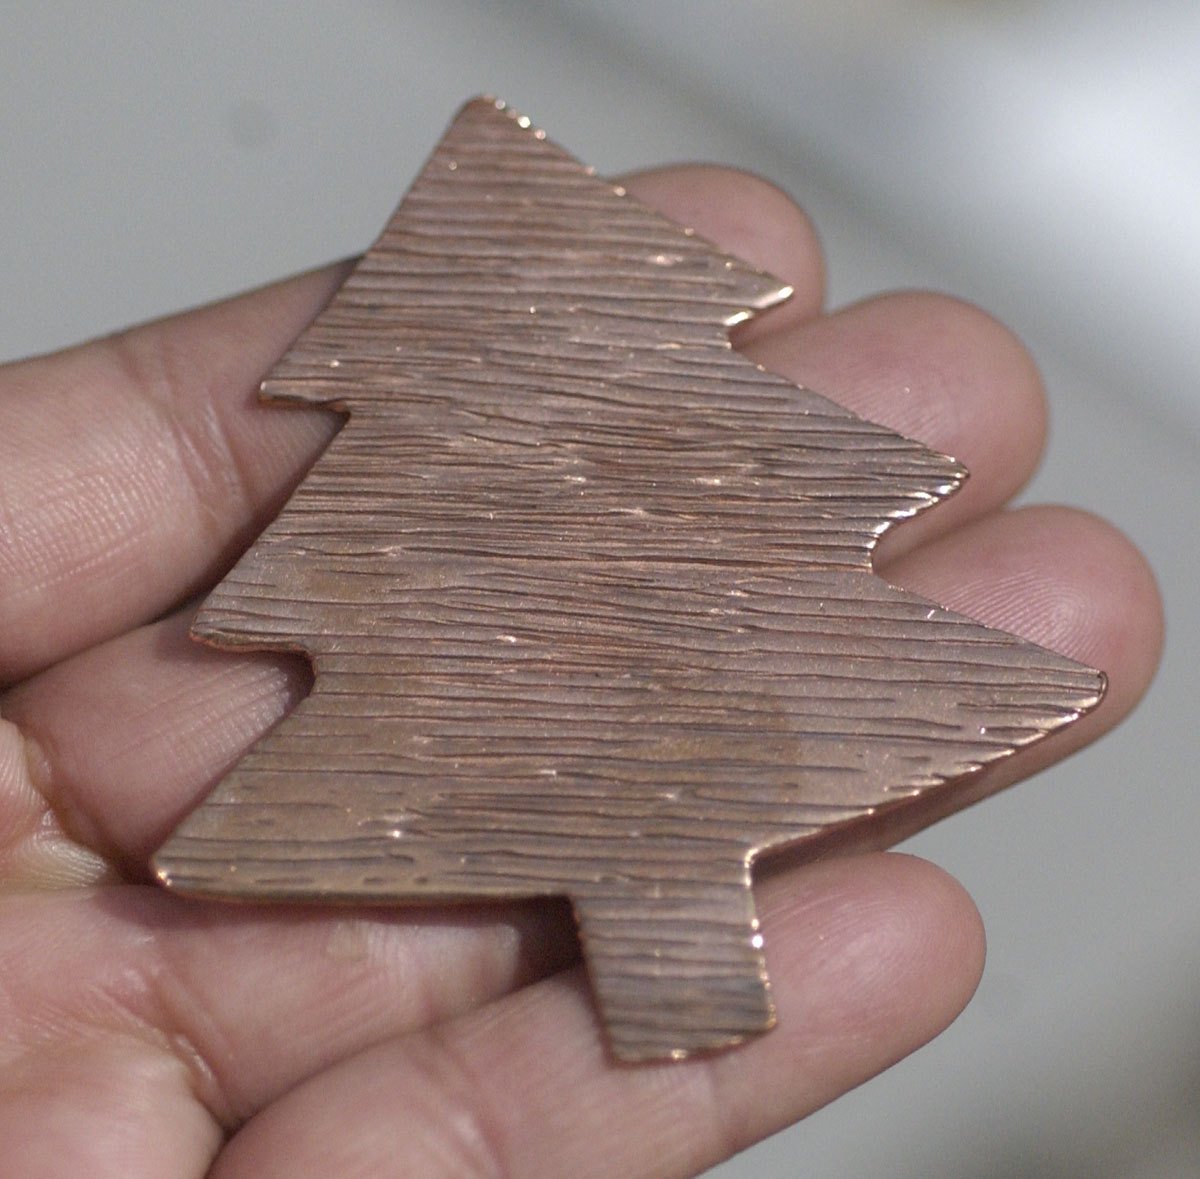 Blank Large Christmas Tree Texture Woodgrain 62mm x 57mm Metal Blanks Shape Form Variety of Metals - 2 pieces